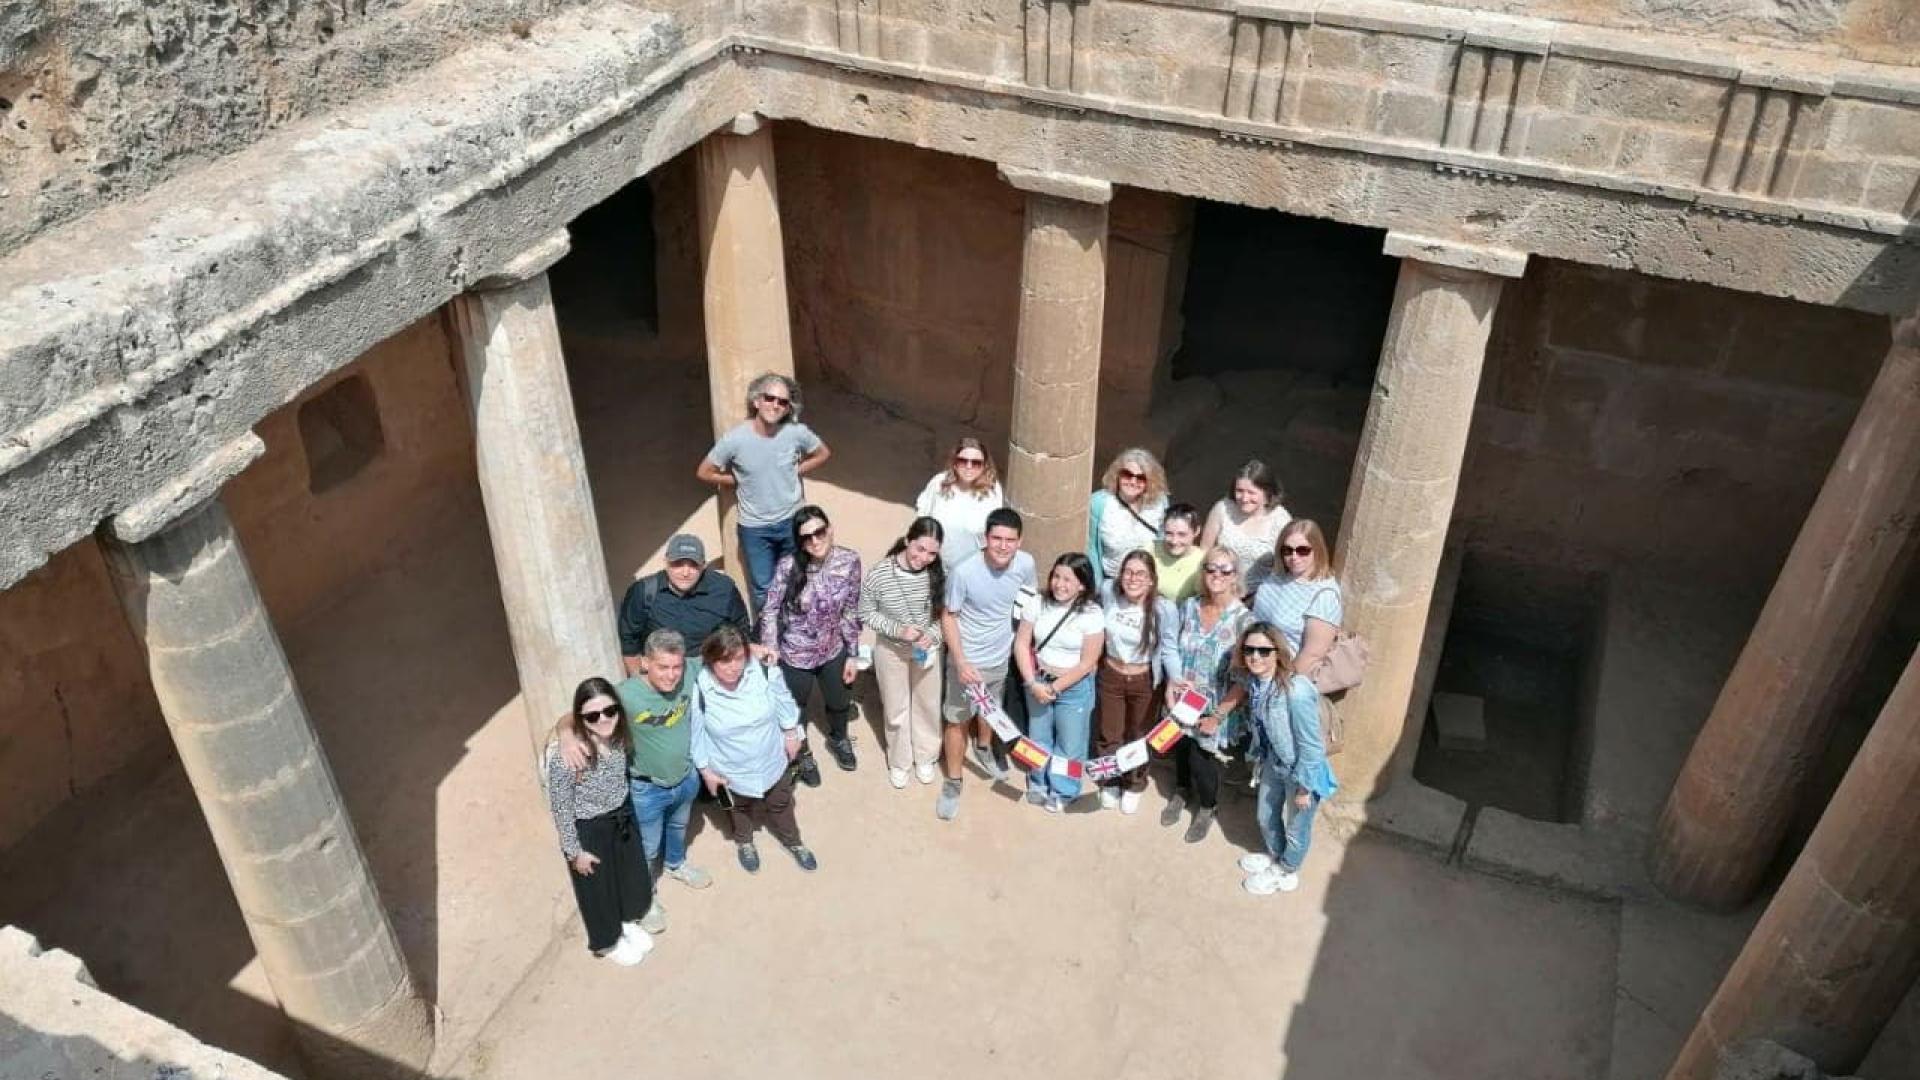 A group of people stood in an archeological tomb